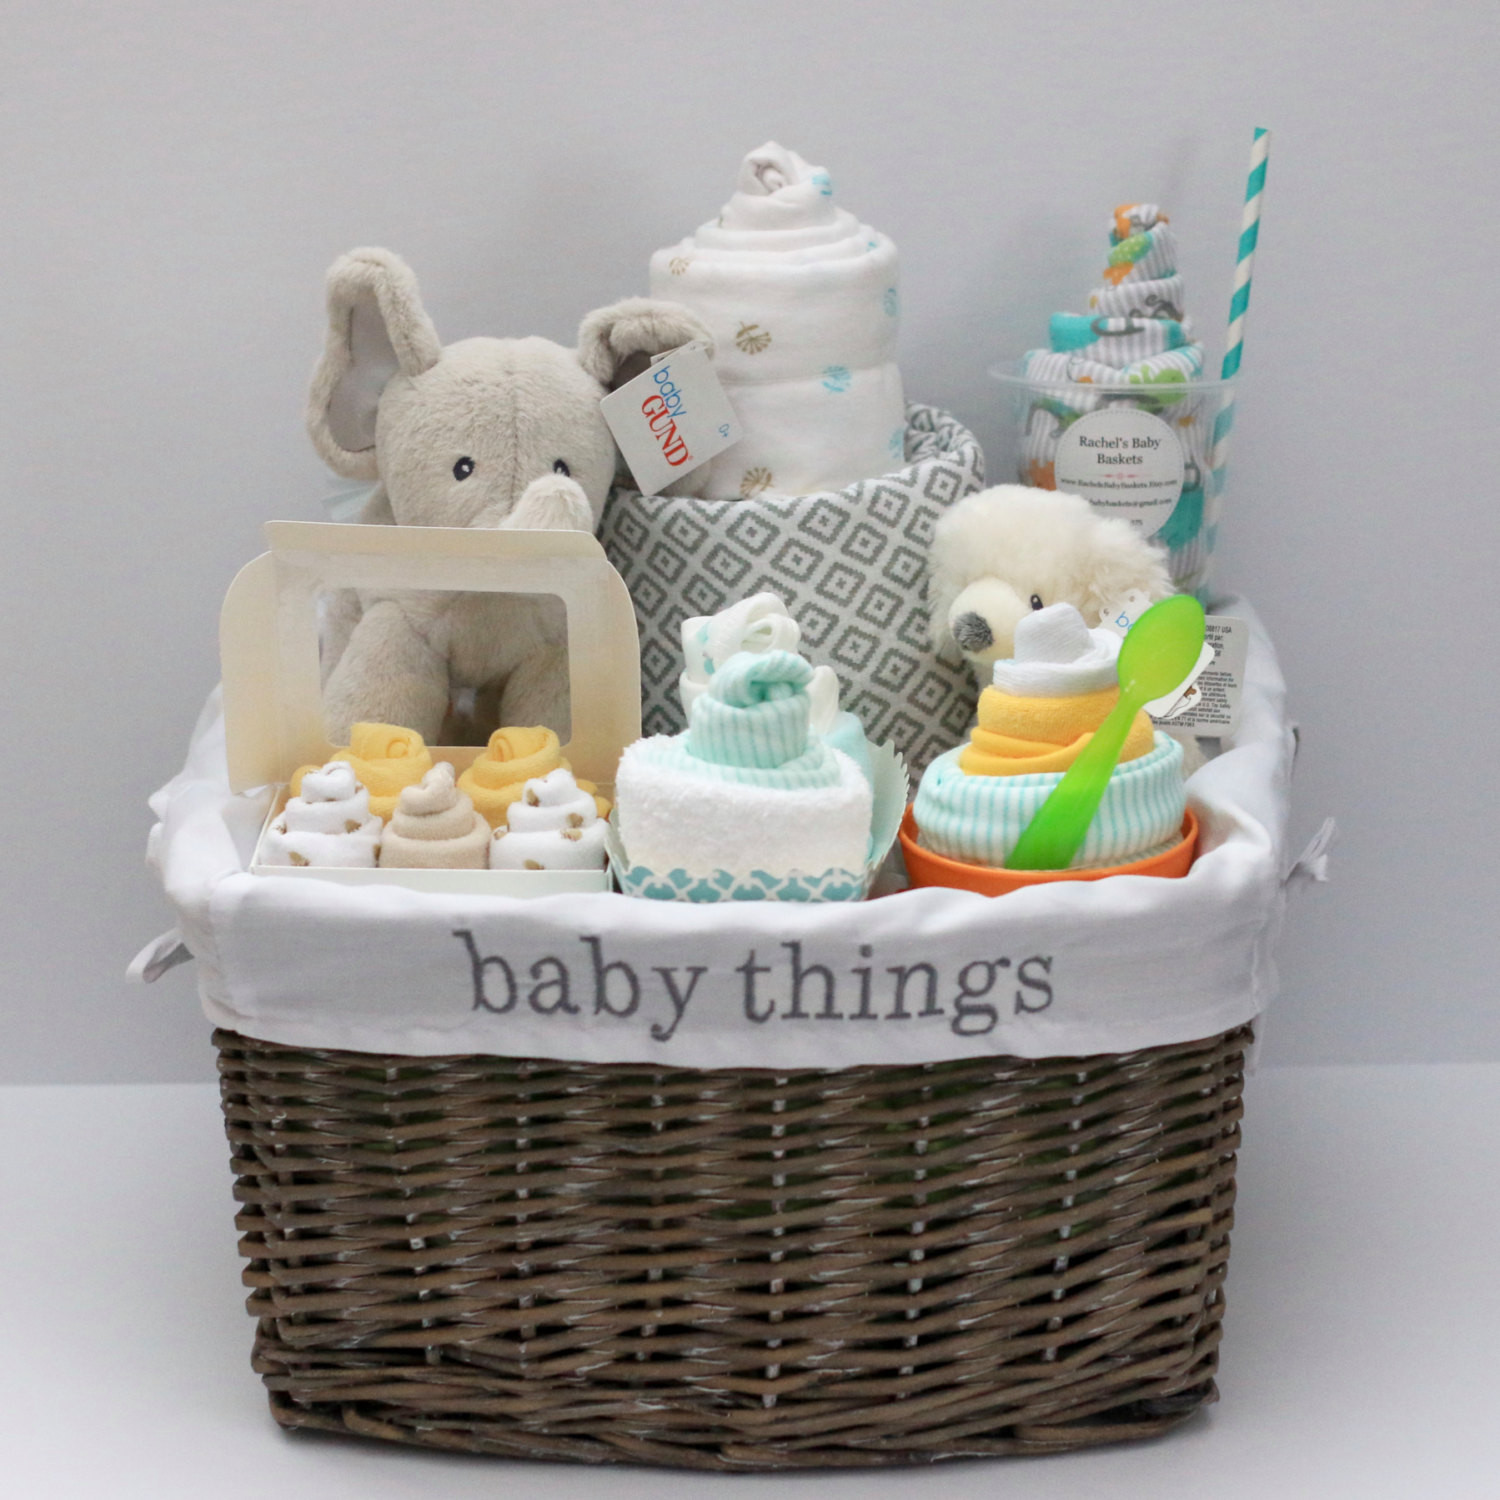 Awesome Baby Gift Ideas
 Gender Neutral Baby Gift Basket Baby Shower Gift Unique Baby